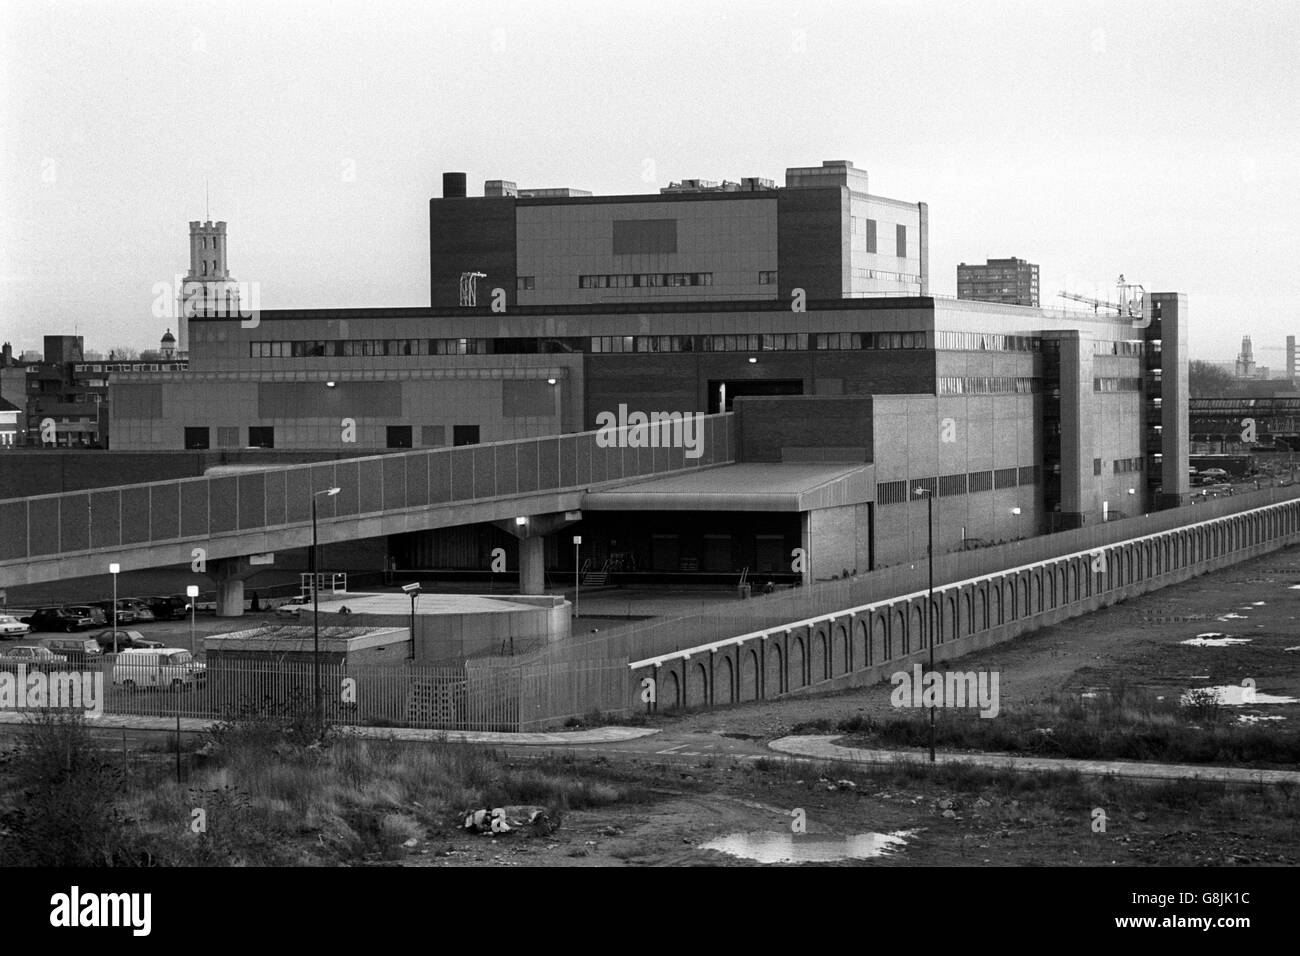 The new News International print plant at Wapping, east London. Stock Photo